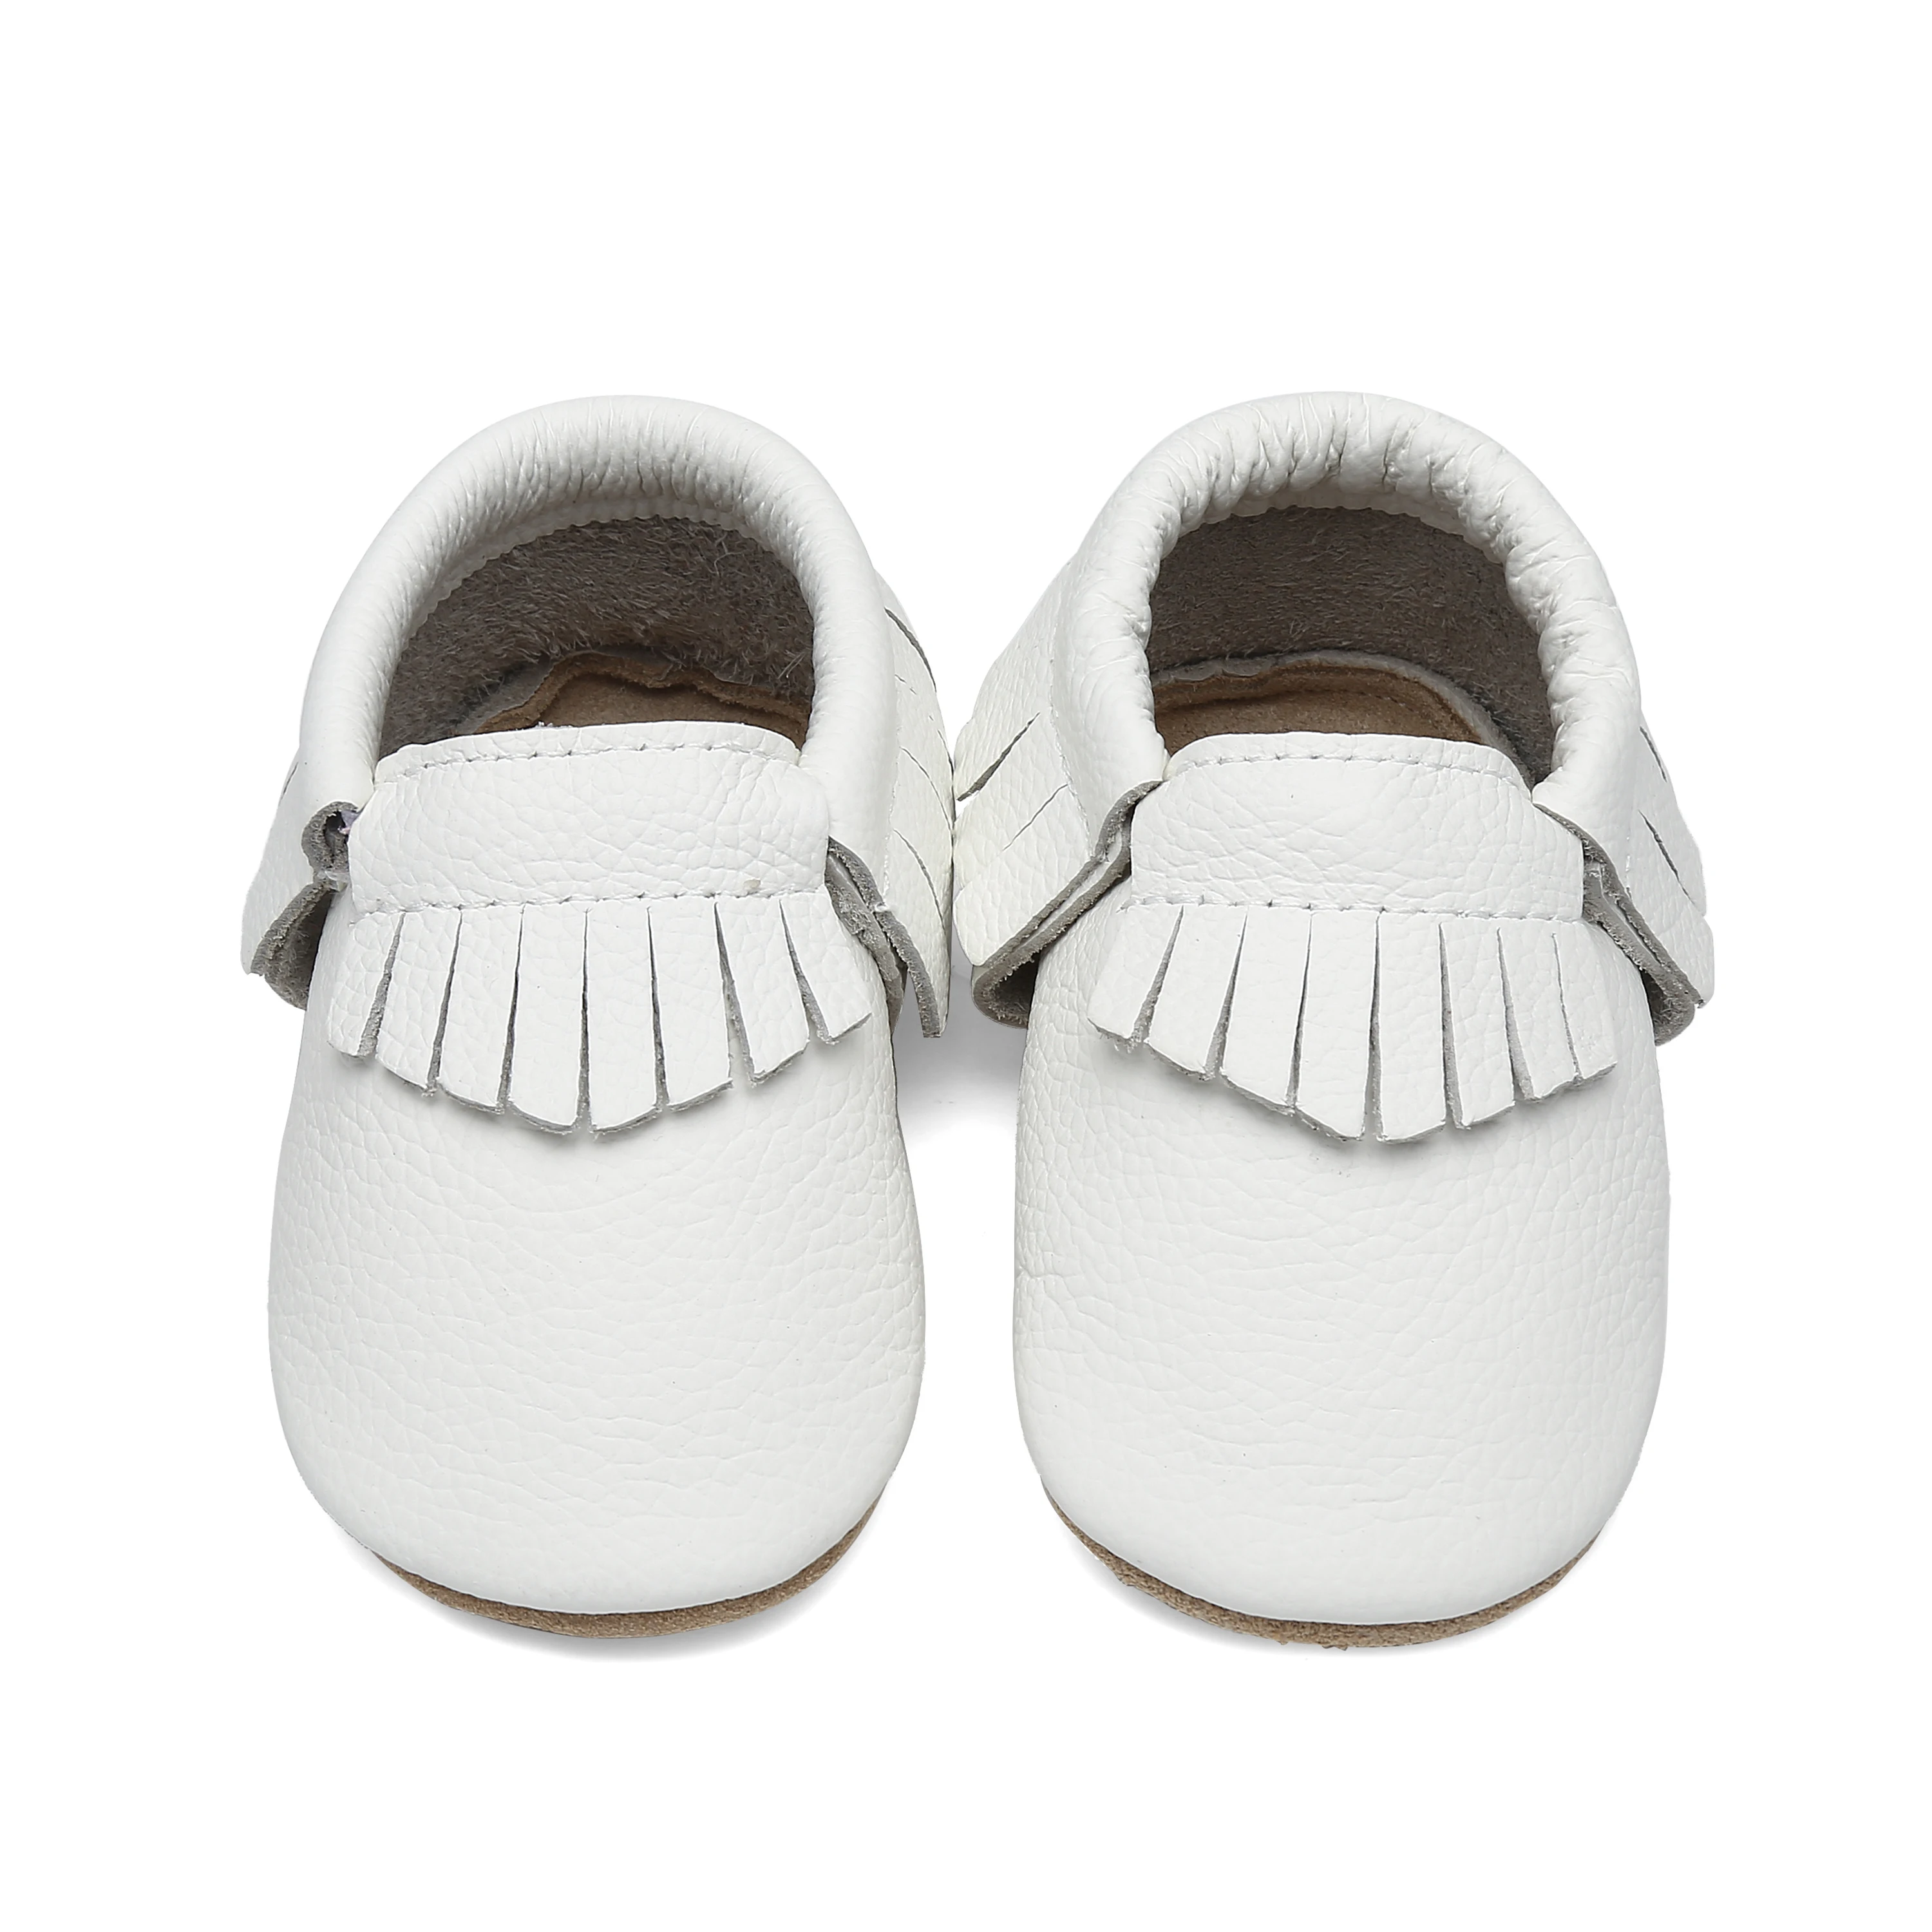 

Factory Price Soft Genuine Leather 0-24 White Tassels Custom Casual Baby Shoes Toddler For Kids Boys Girls, 6 color